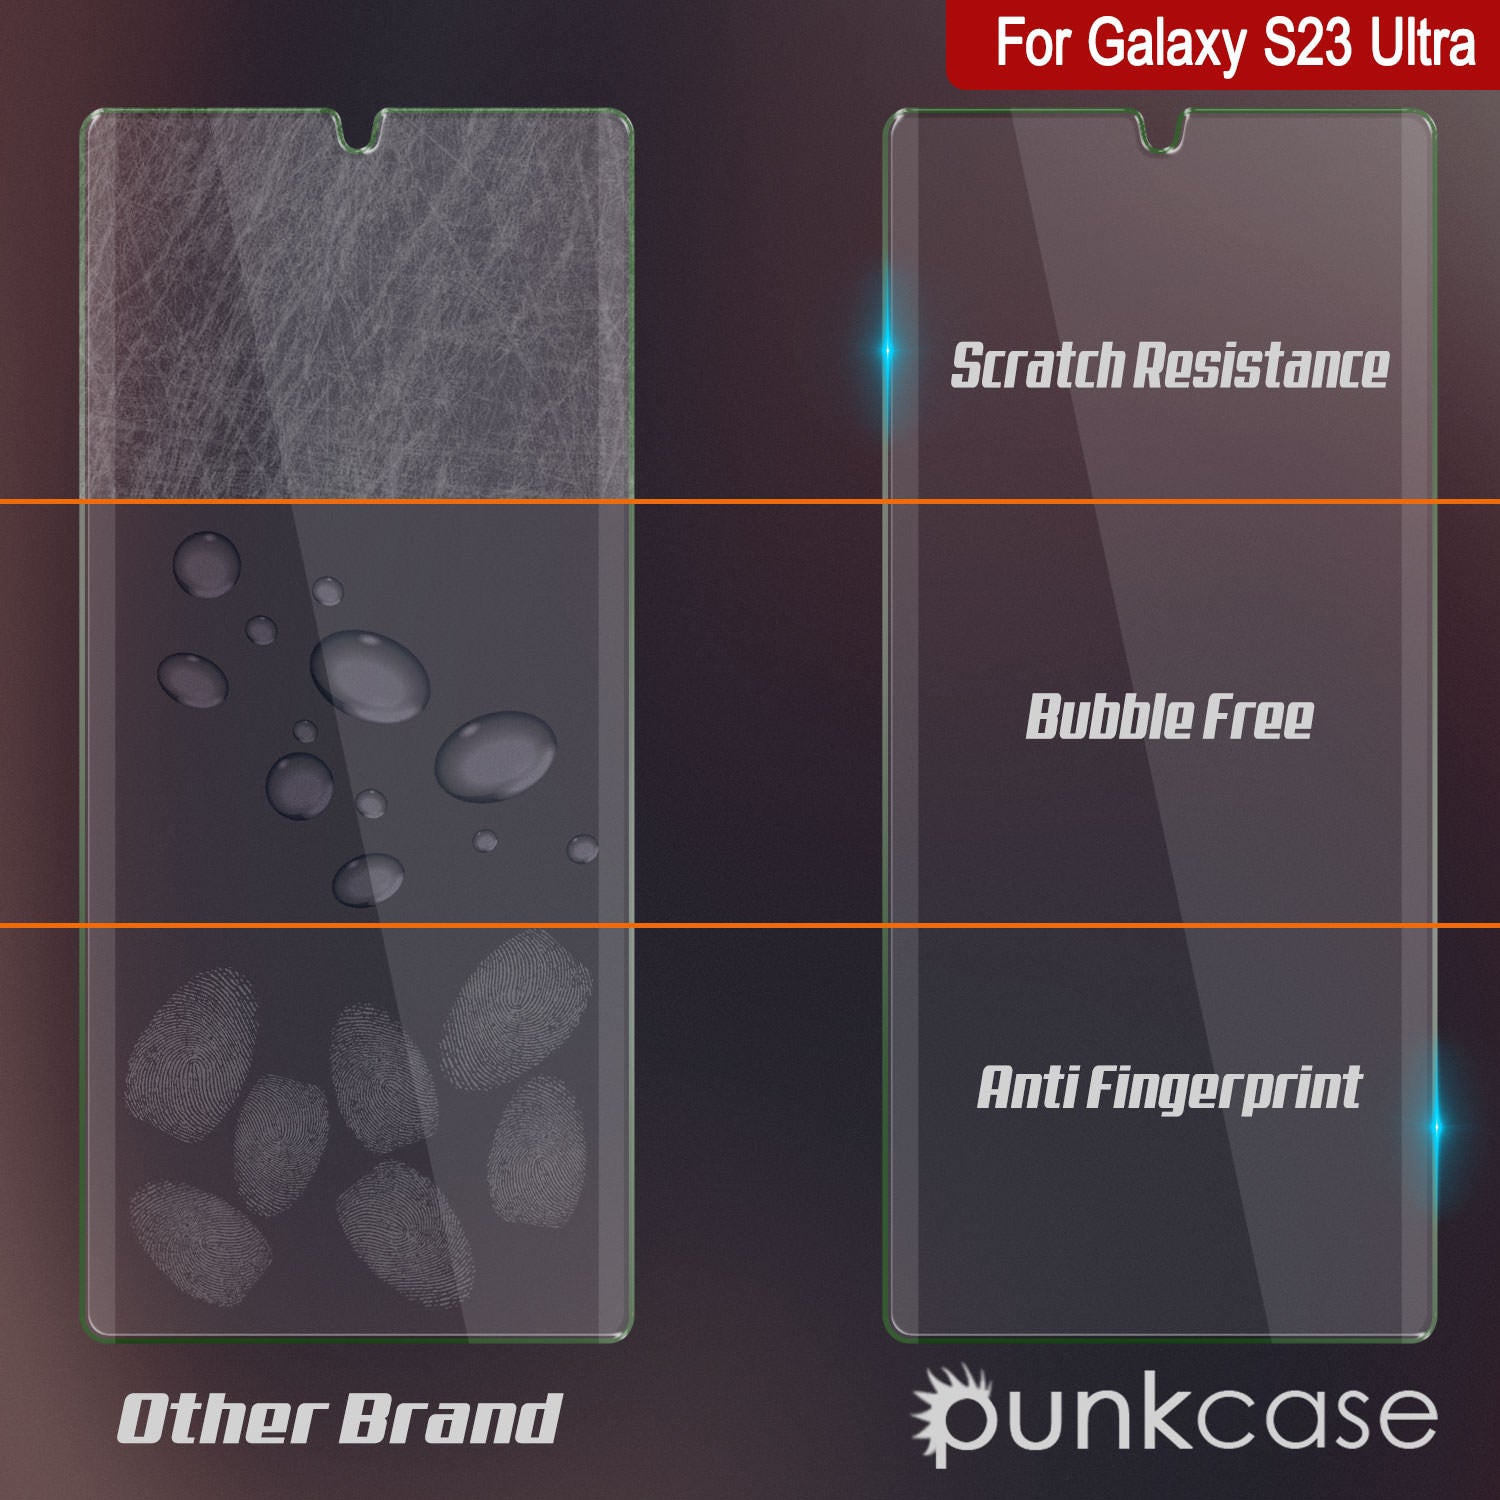 Galaxy S23 Ultra Black Punkcase Glass SHIELD Tempered Glass Screen Protector 0.33mm Thick 9H Glass